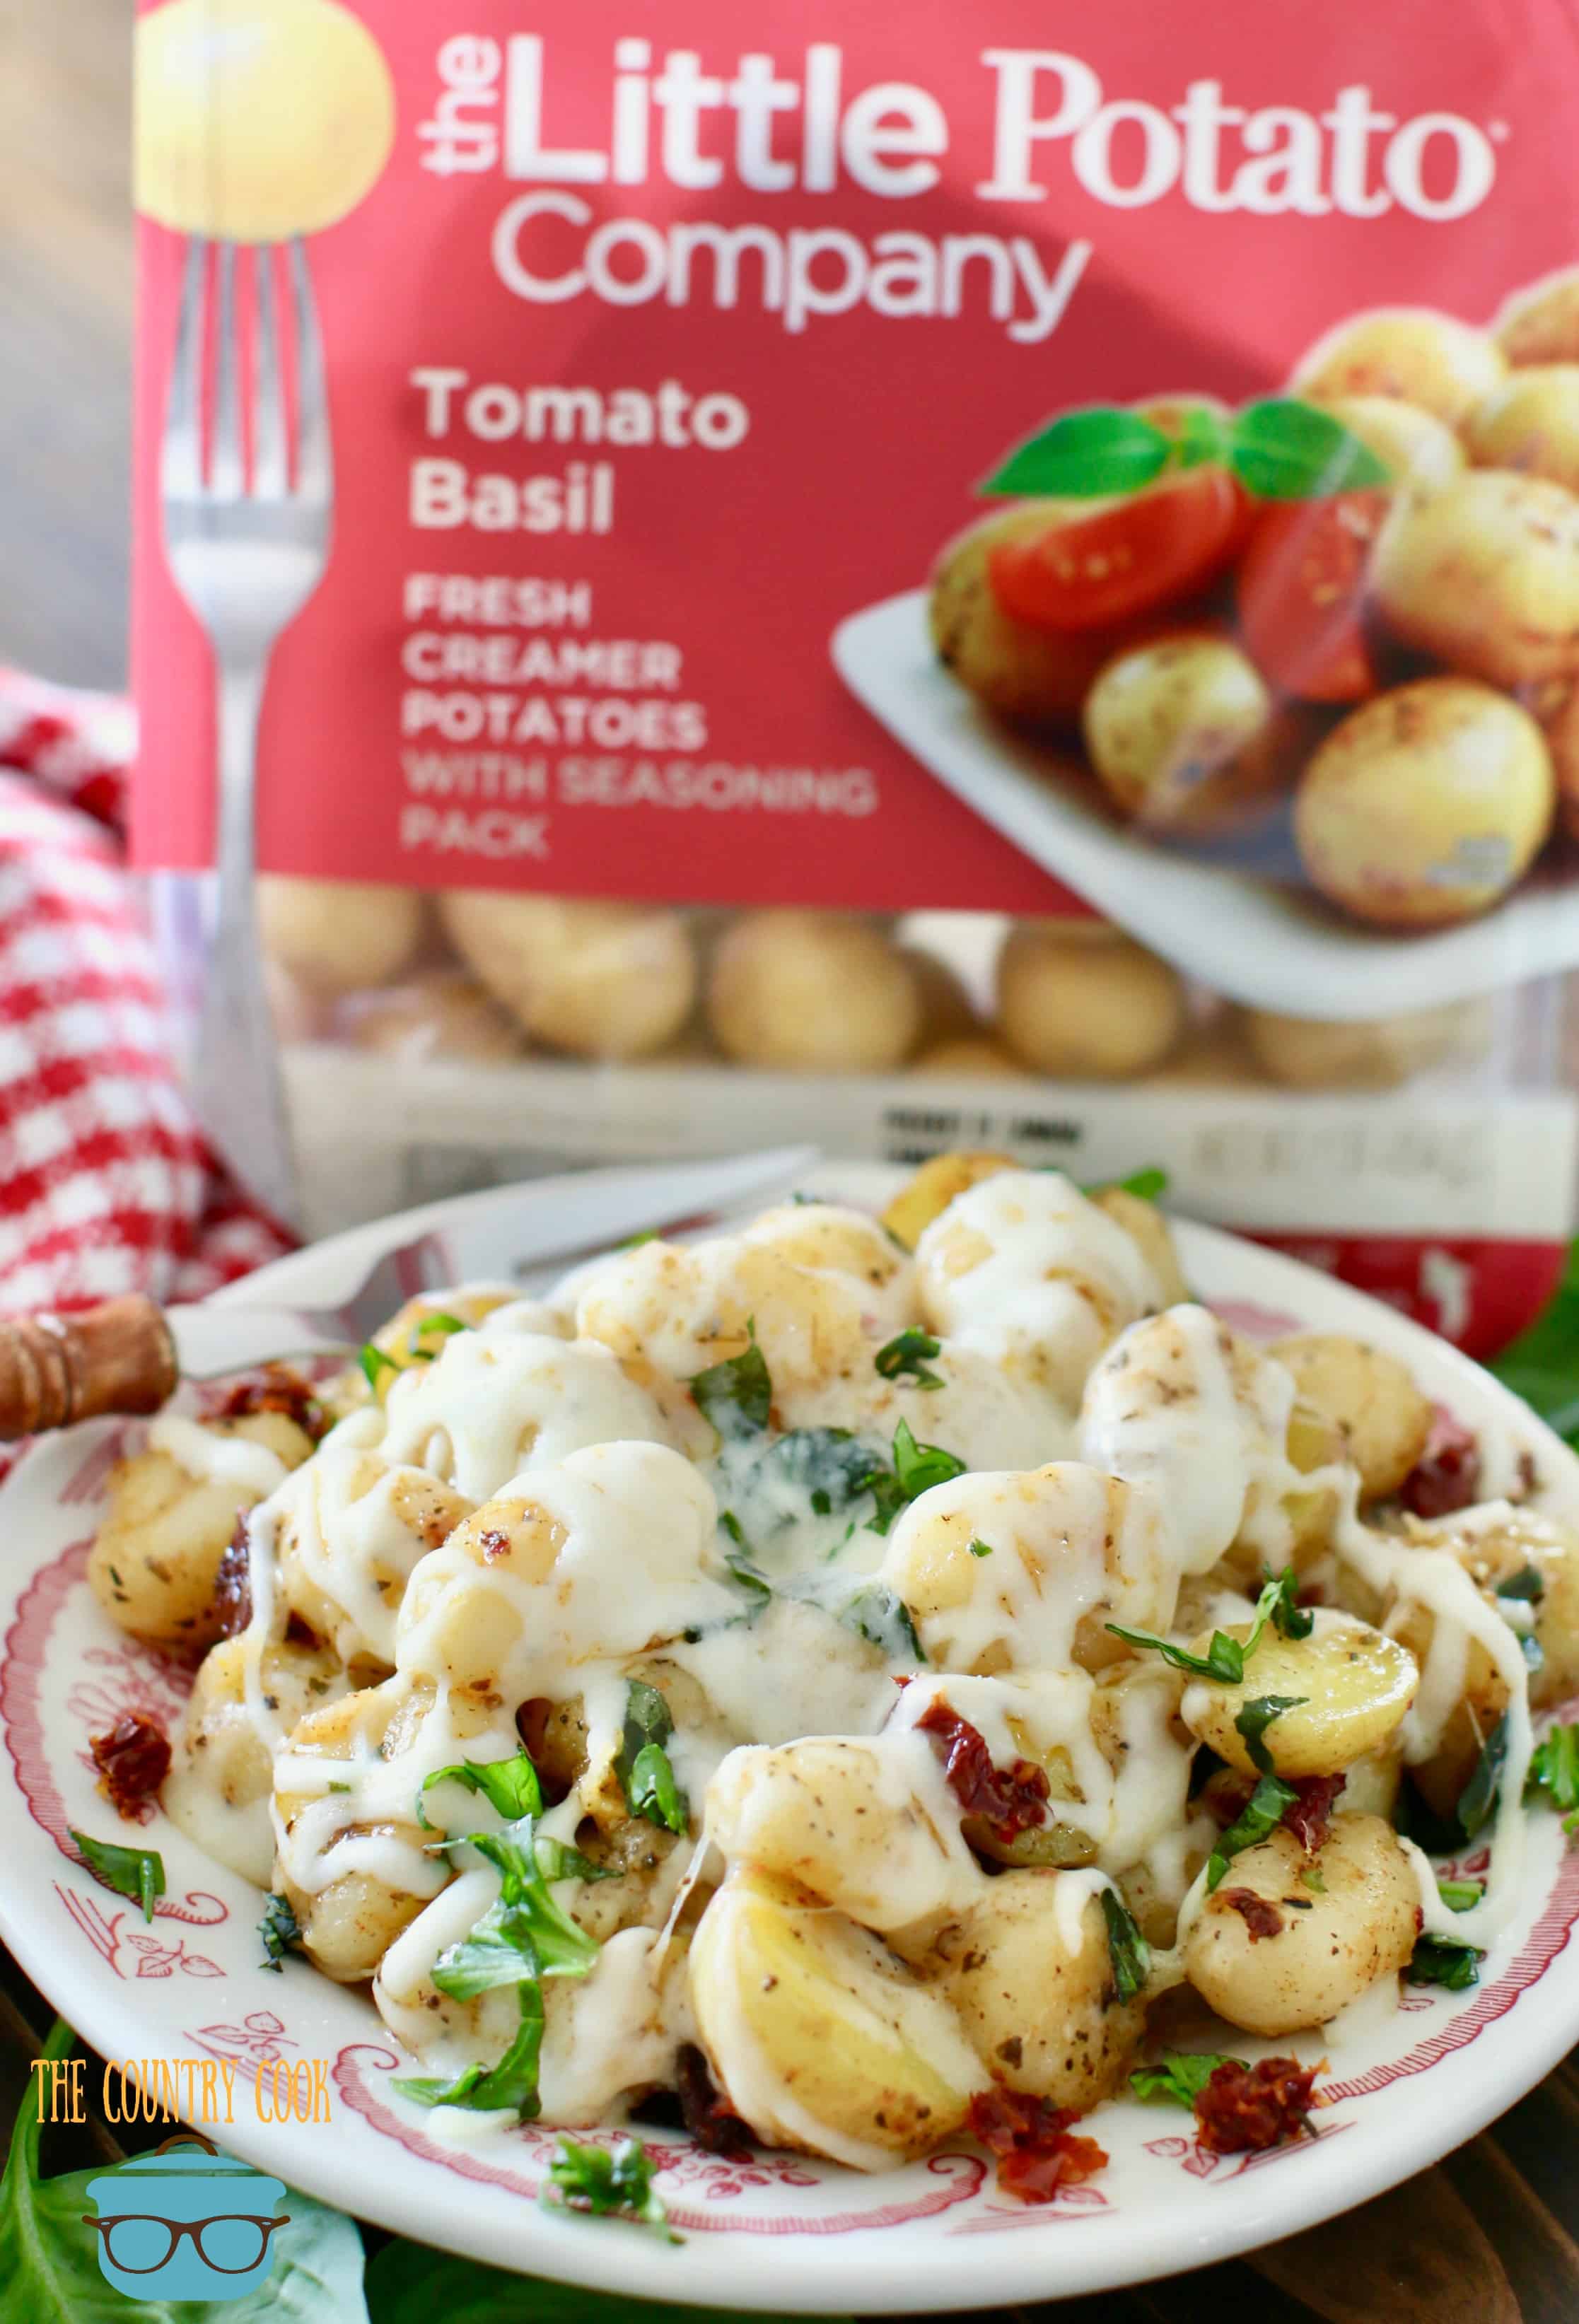 Cheesy Italian Potatoes and Gnocchi with sun-dried tomatoes and fresh basil shown on a plate with a packaging of Little Potatoes in the background.